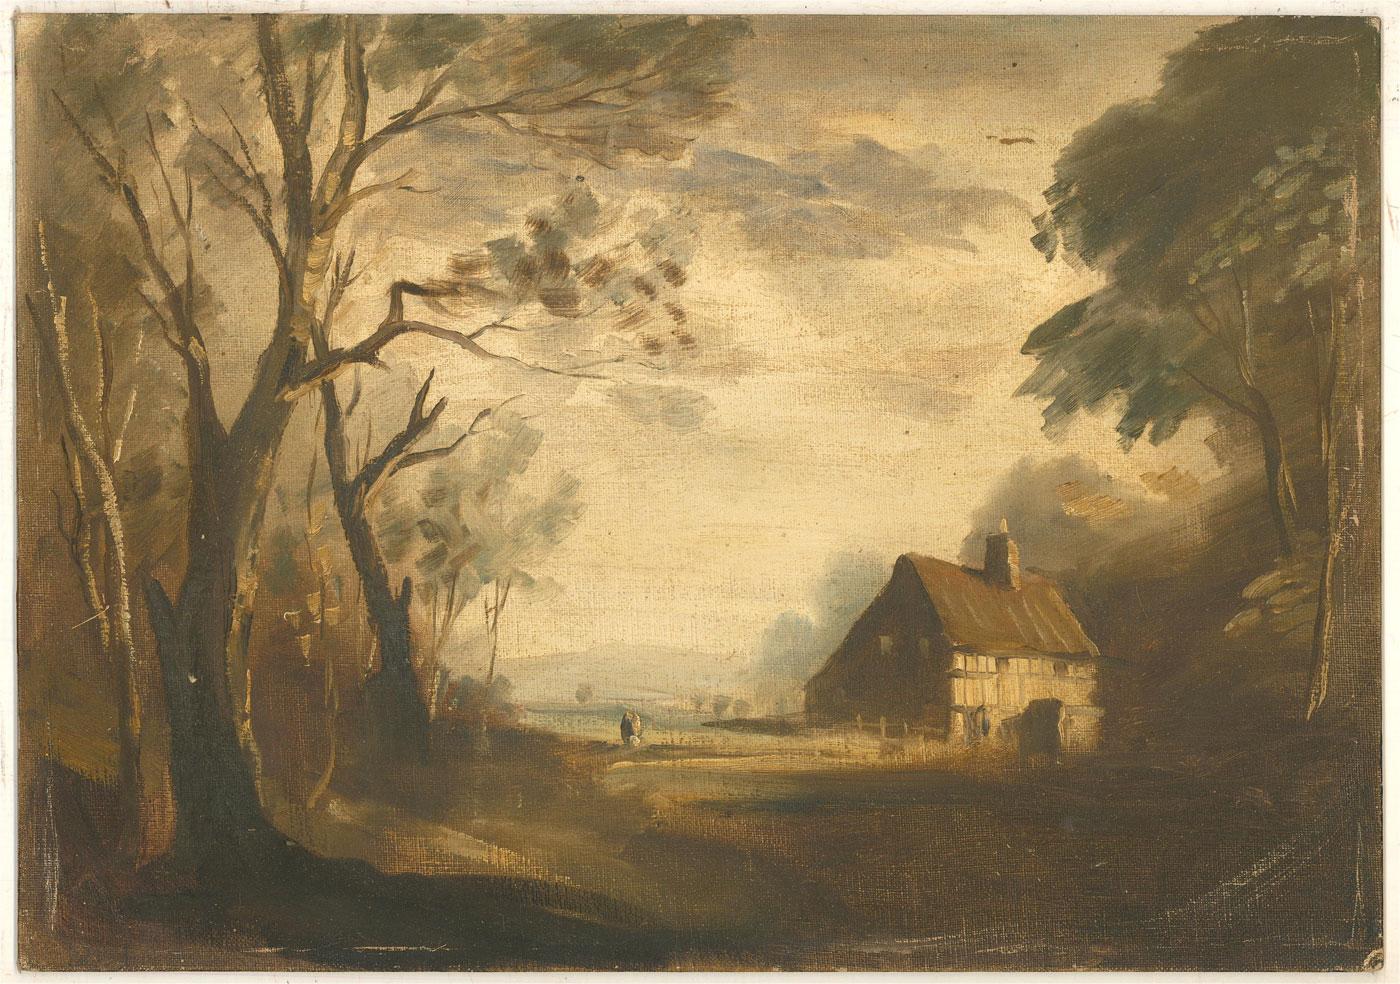 This rustic landscape depicts a charming country scene with a quaint cottage to the right. Unsigned. The painting was acquired by Sulis Fine Art along with a signed work from Padwick and is typical of his style. On canvas board .
